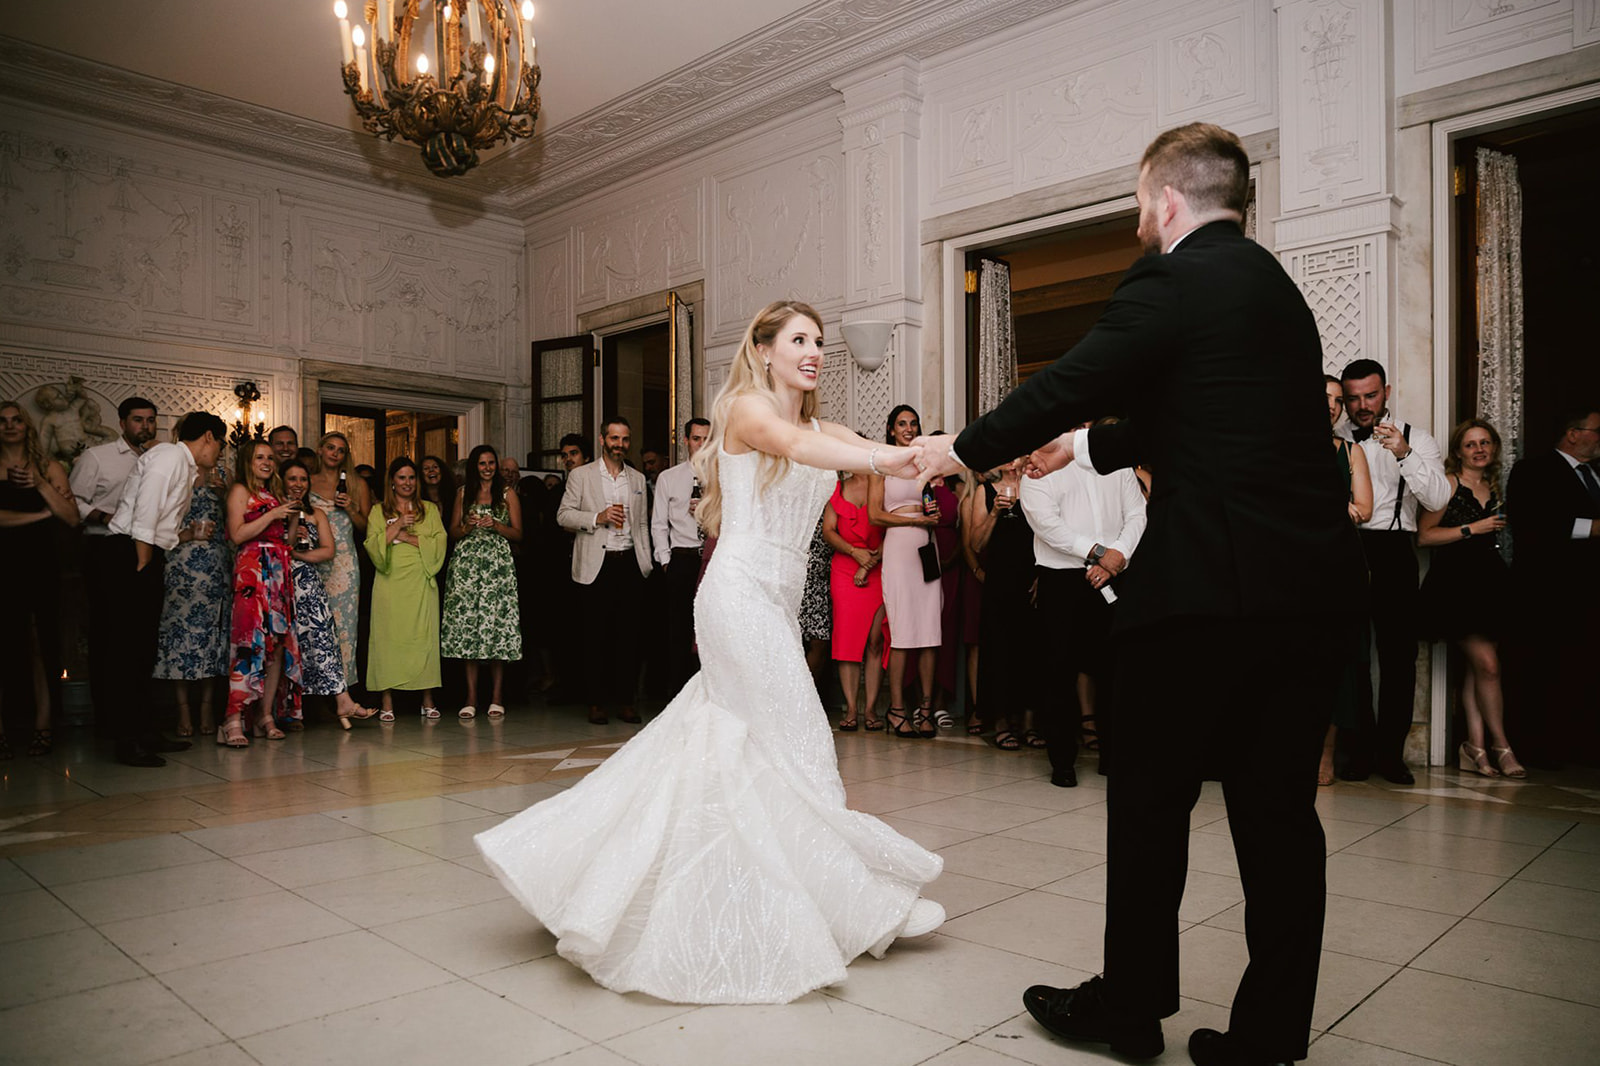 Epic first dance moments at Armour House epitomize the romance and joy of the newlyweds' celebration.